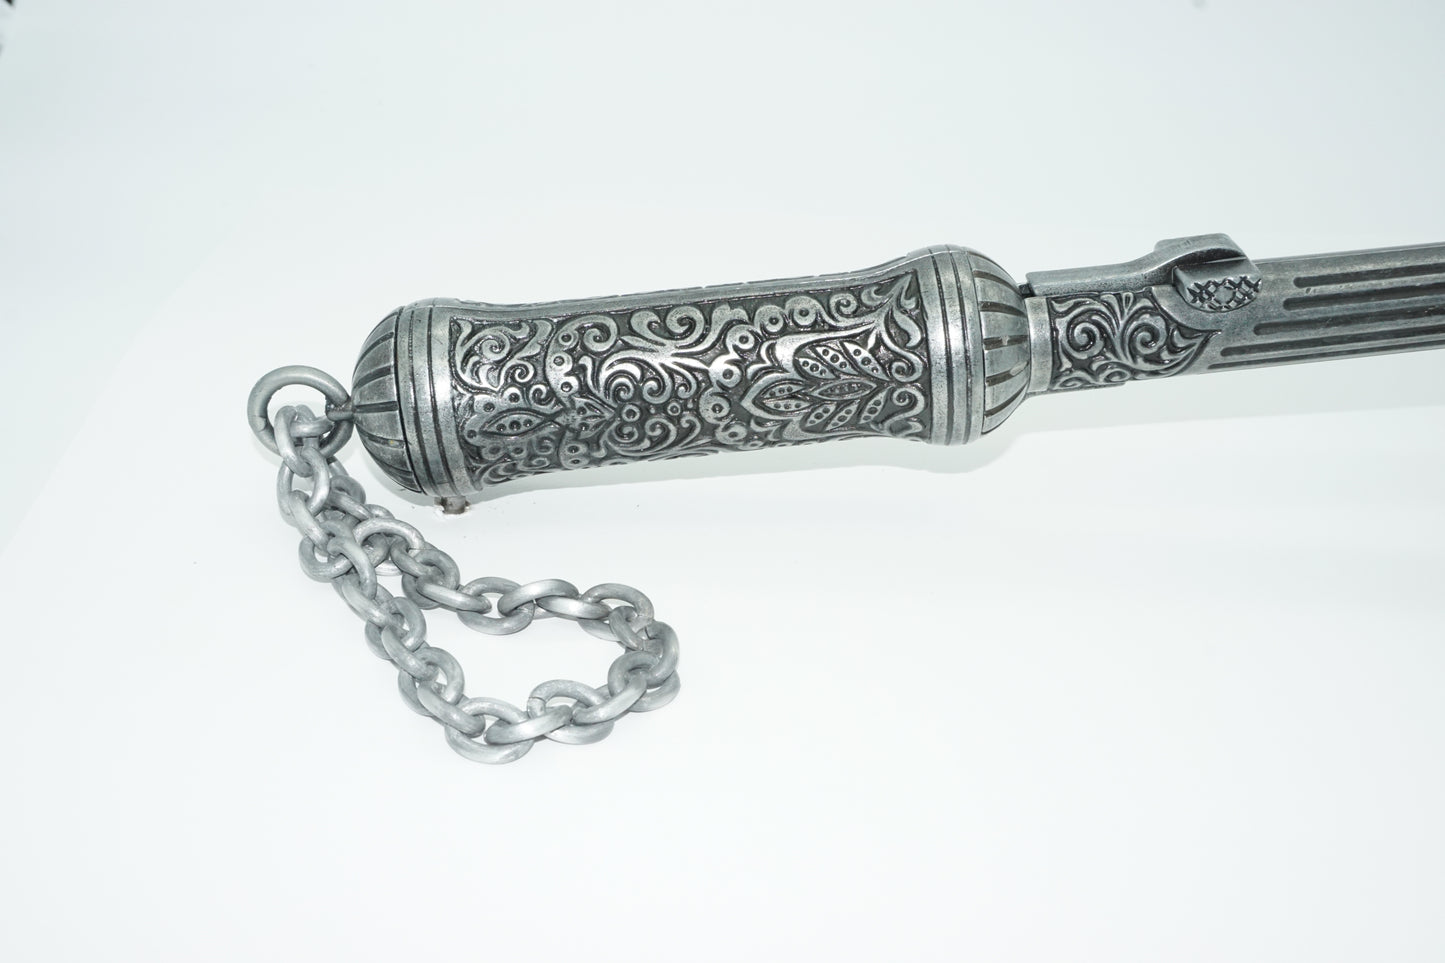 Butt end of ottoman pistol axe with intricate carvings and a chain to carry it.